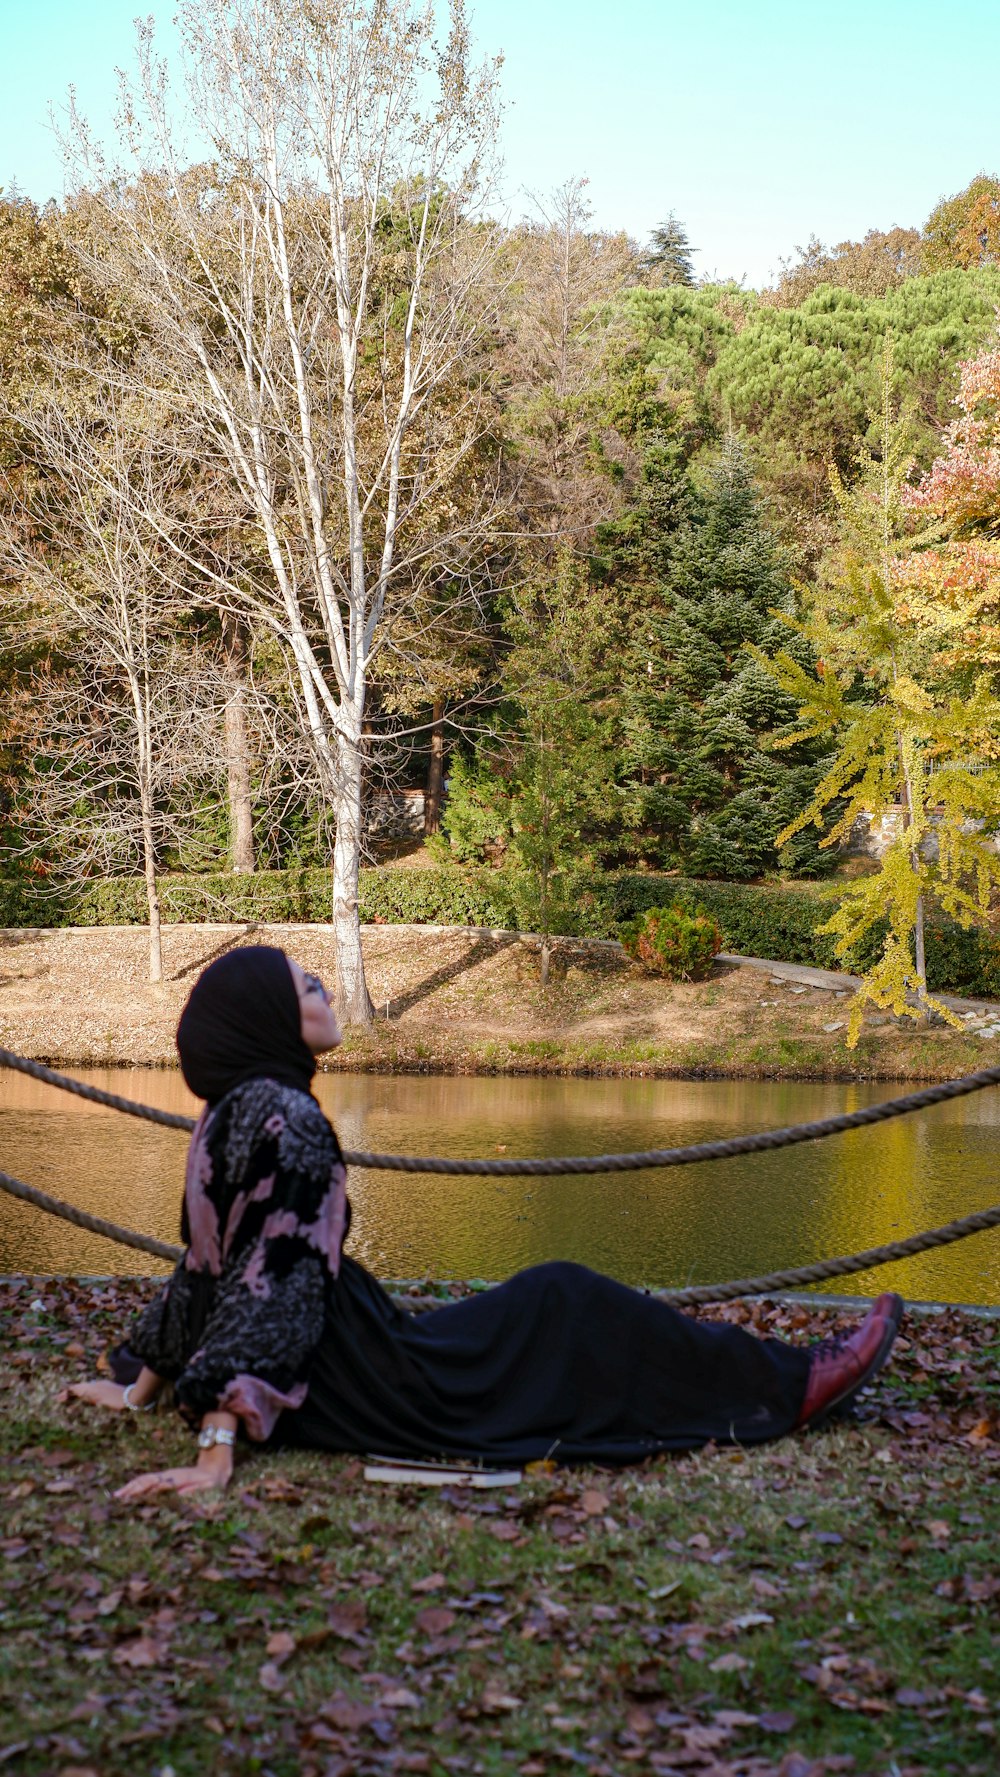 a person sitting on a bench by a pond with trees